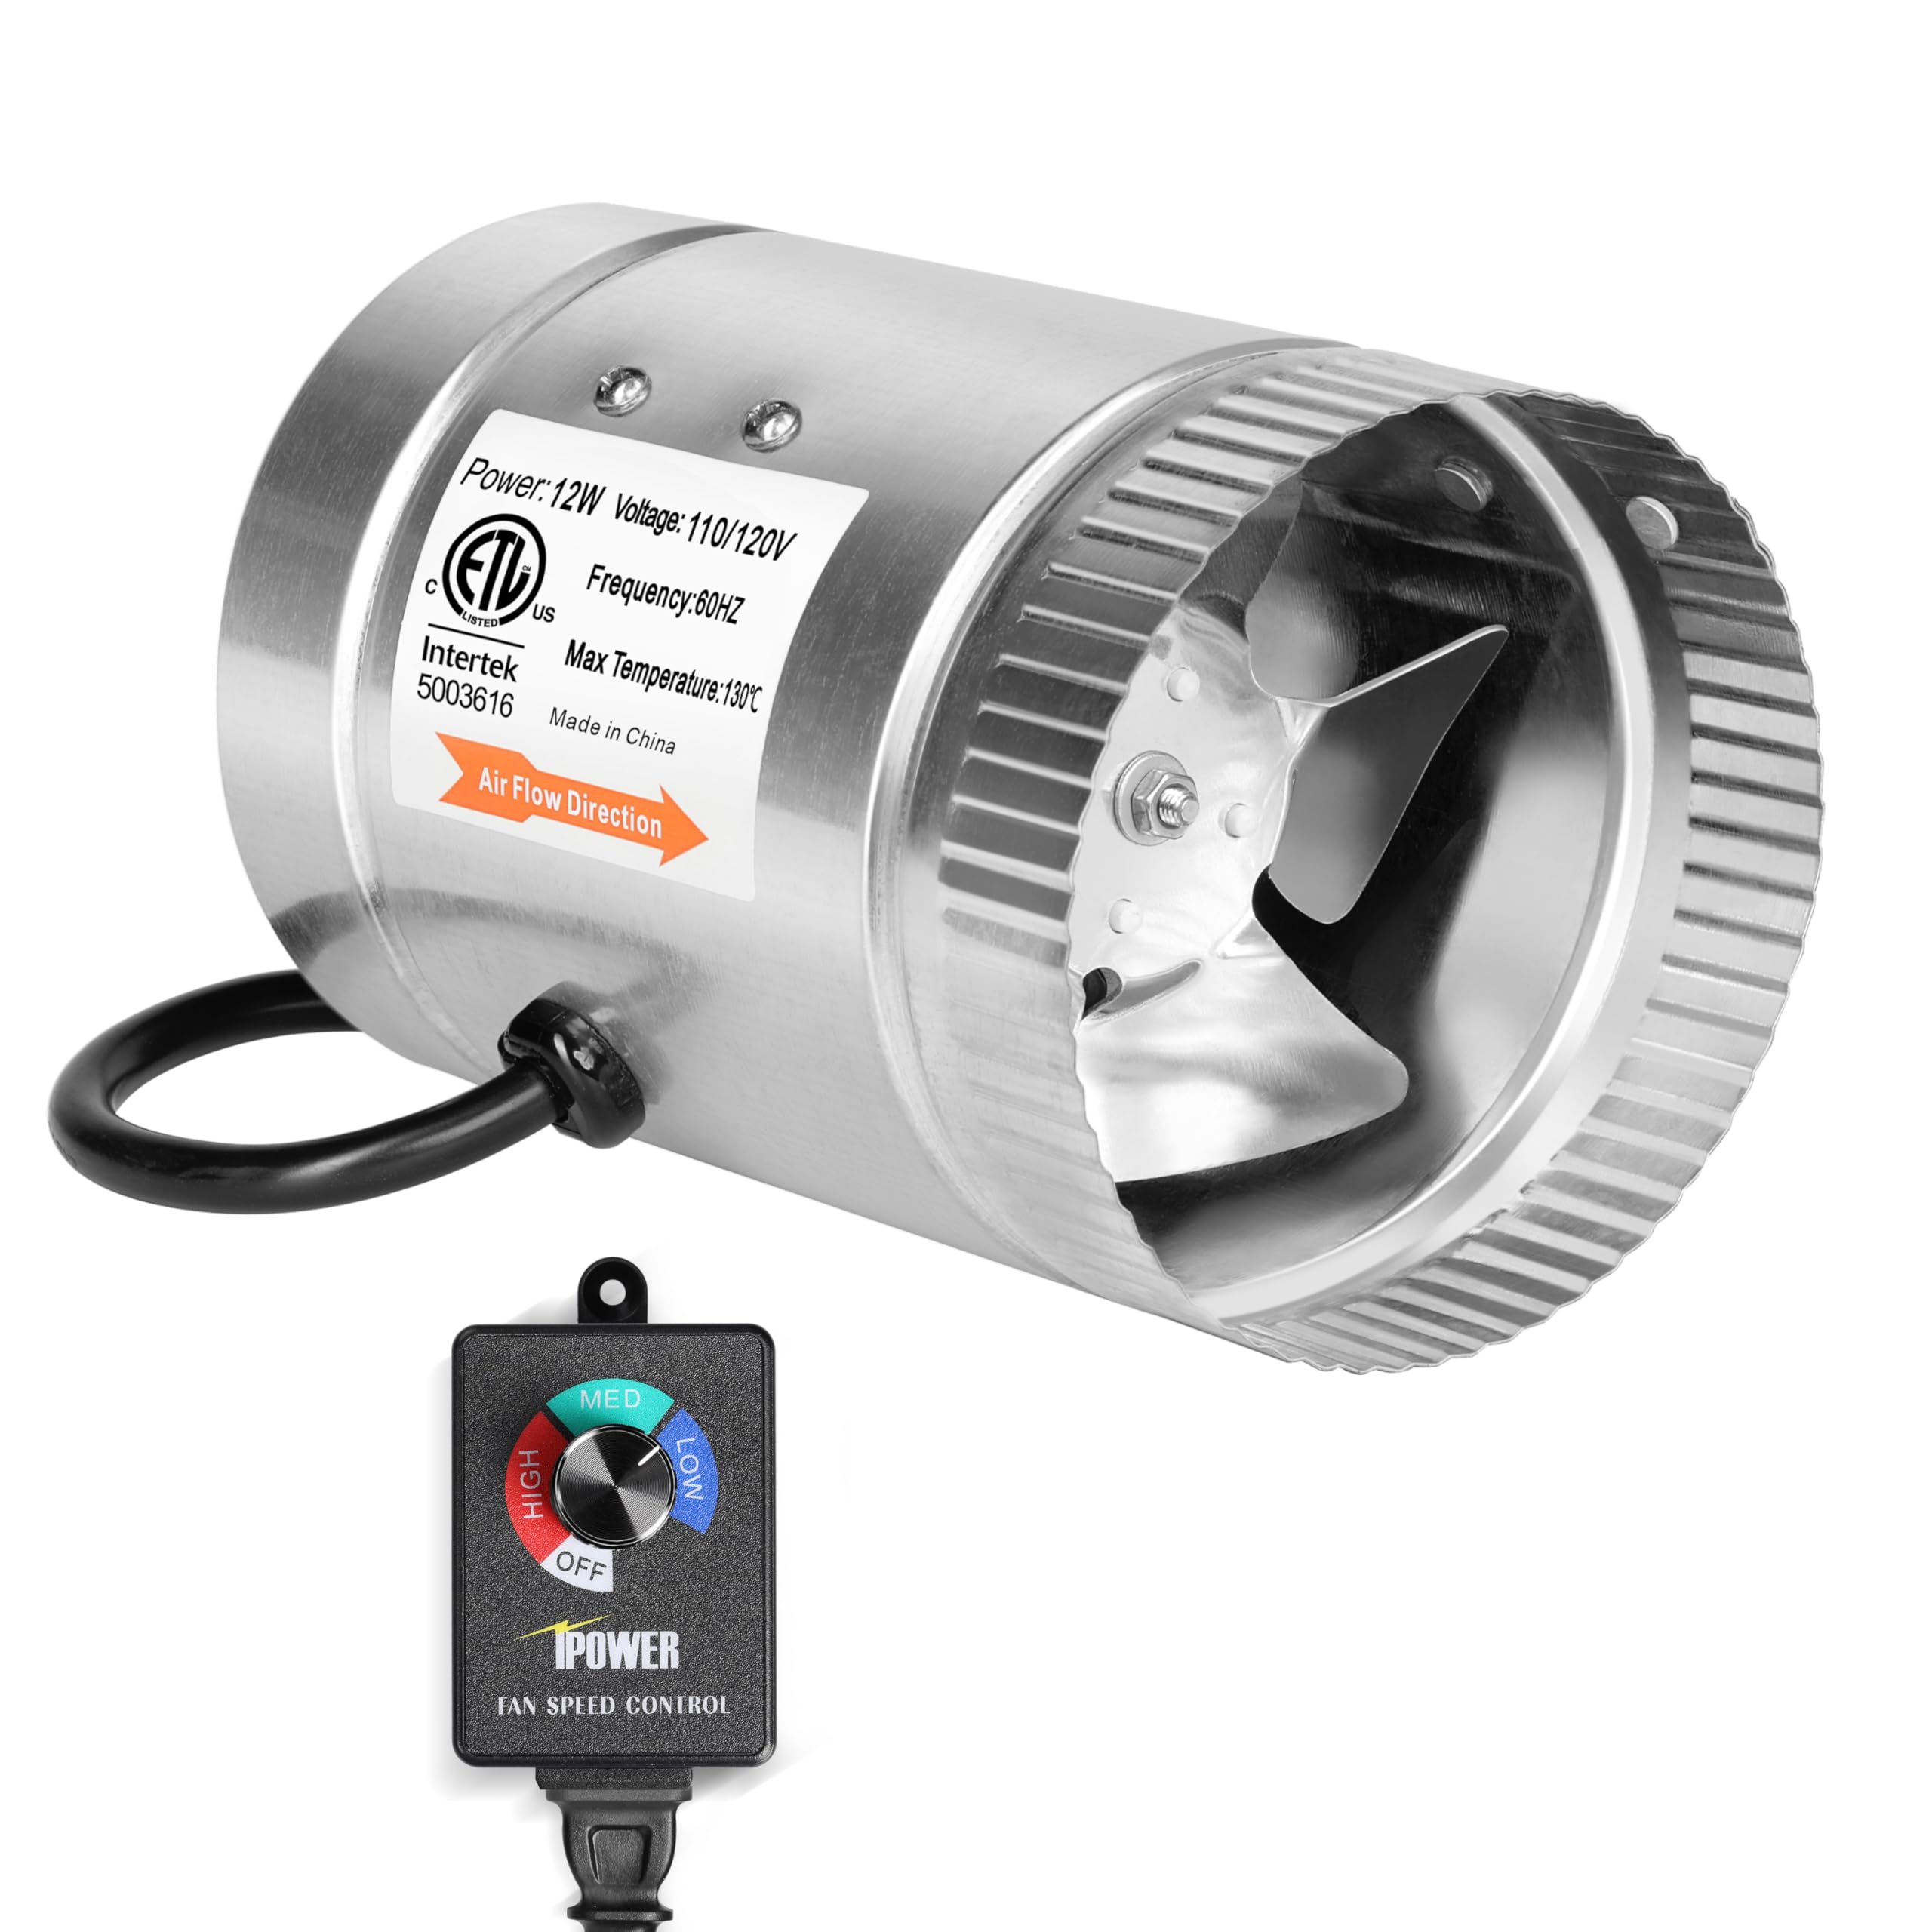 iPower 6 Inch Inline Booster Duct Fan with Speed Controller, 240 CFM HVAC Exhaust Ventilation Blower, Low Noise for Grow Tent, Attics, Basements, Bathrooms and Kitchens